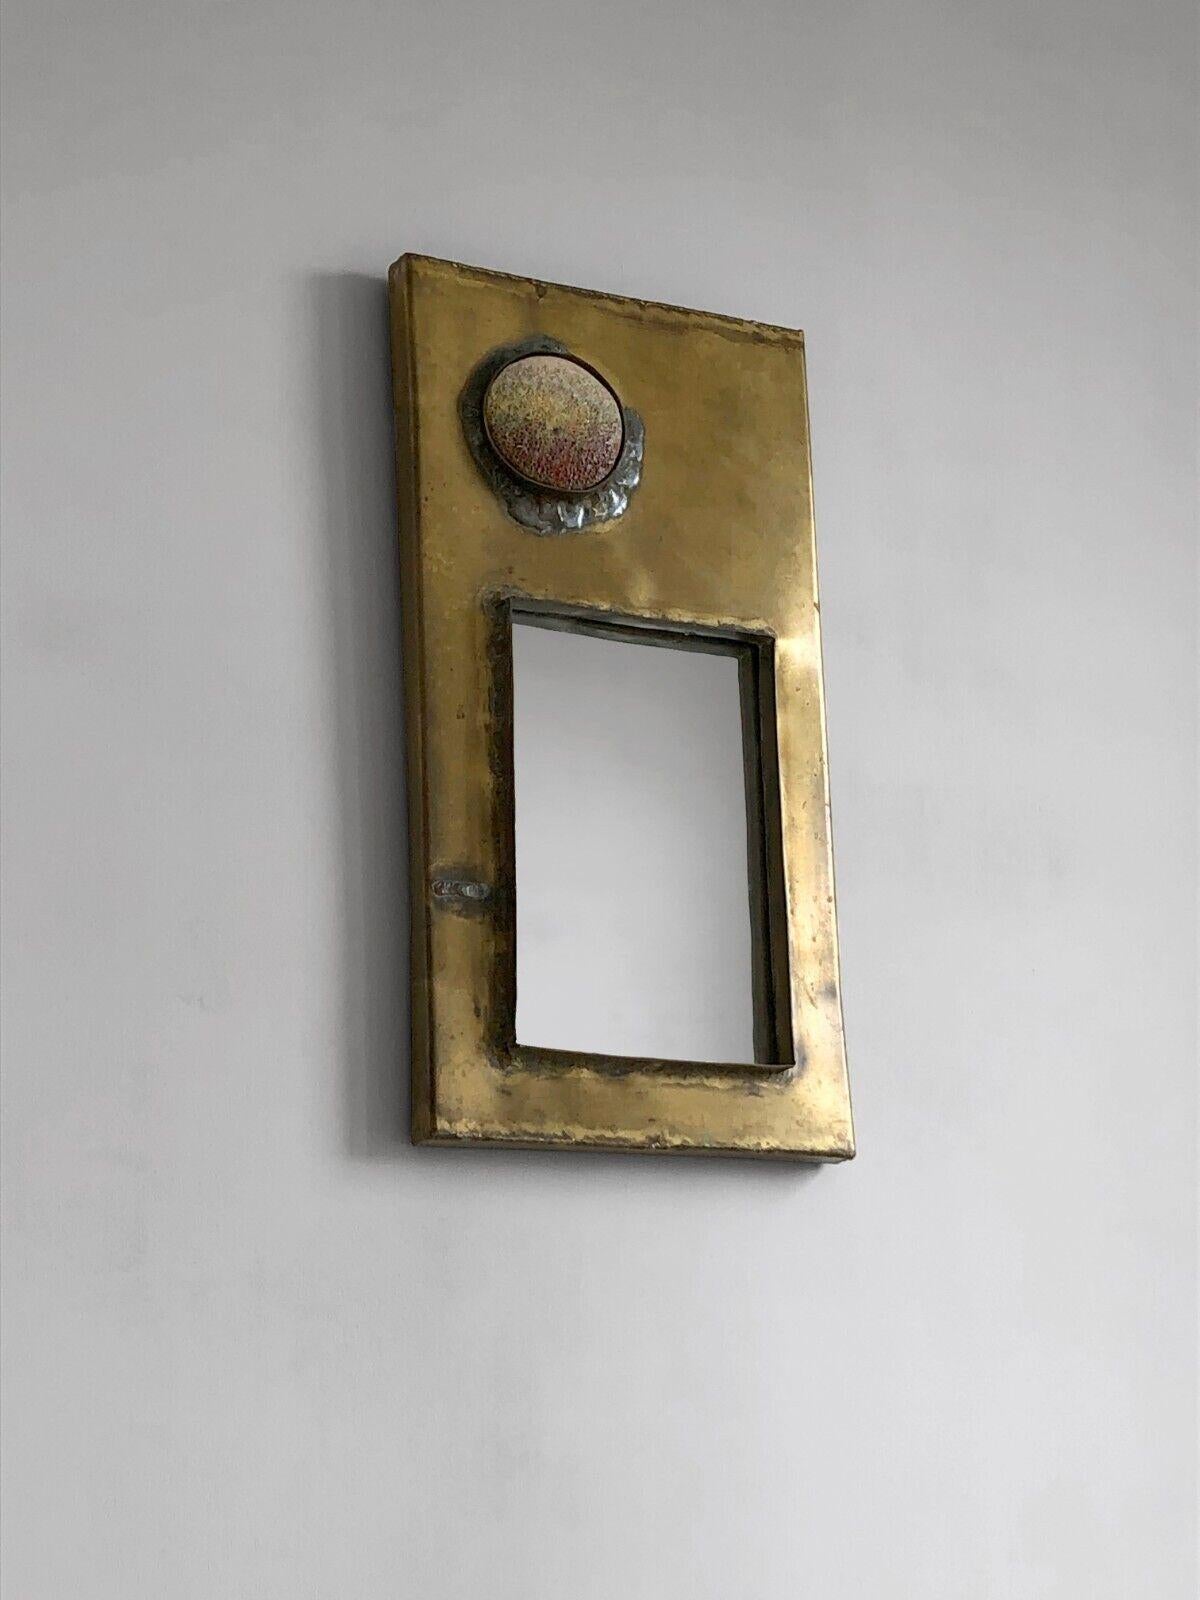 An exceptional rectangular and asymmetrical wall-sculpture mirror, Brutalist, large vertical rectangular frame in bronze or patinated brass, with 2 welded asymmetrical inserts arranged in secondary frames:
- at the top left, a half-hemisphere in